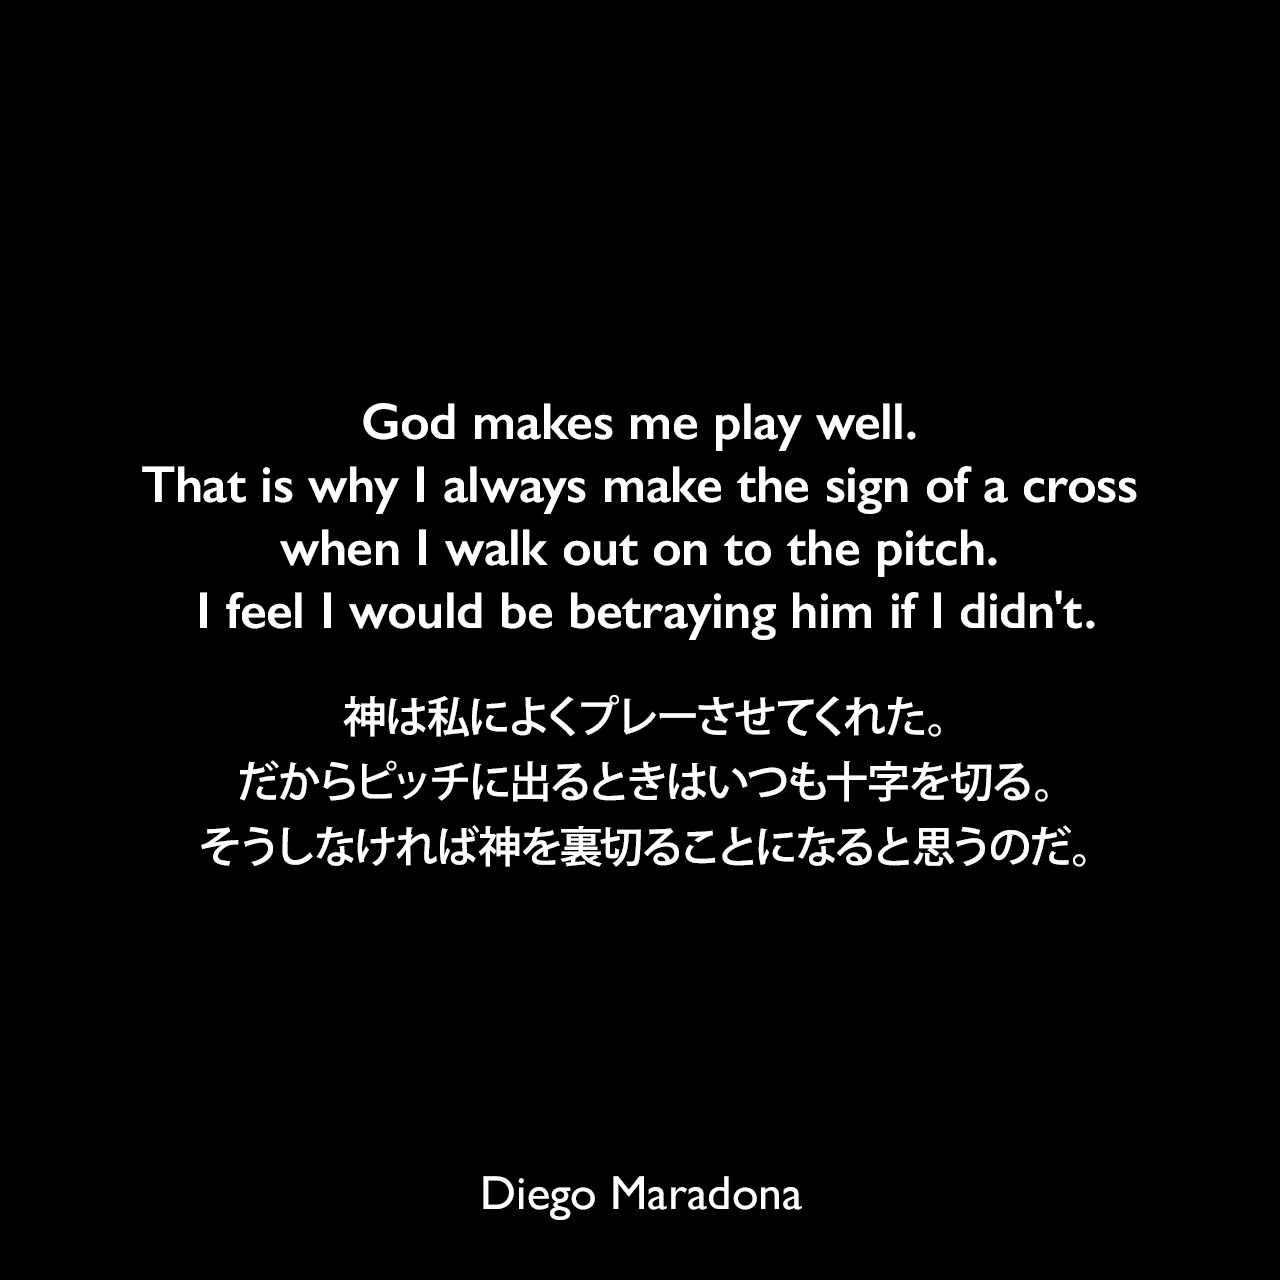 God makes me play well. That is why I always make the sign of a cross when I walk out on to the pitch. I feel I would be betraying him if I didn't.神は私によくプレーさせてくれた。だからピッチに出るときはいつも十字を切る。そうしなければ神を裏切ることになると思うのだ。Diego Maradona